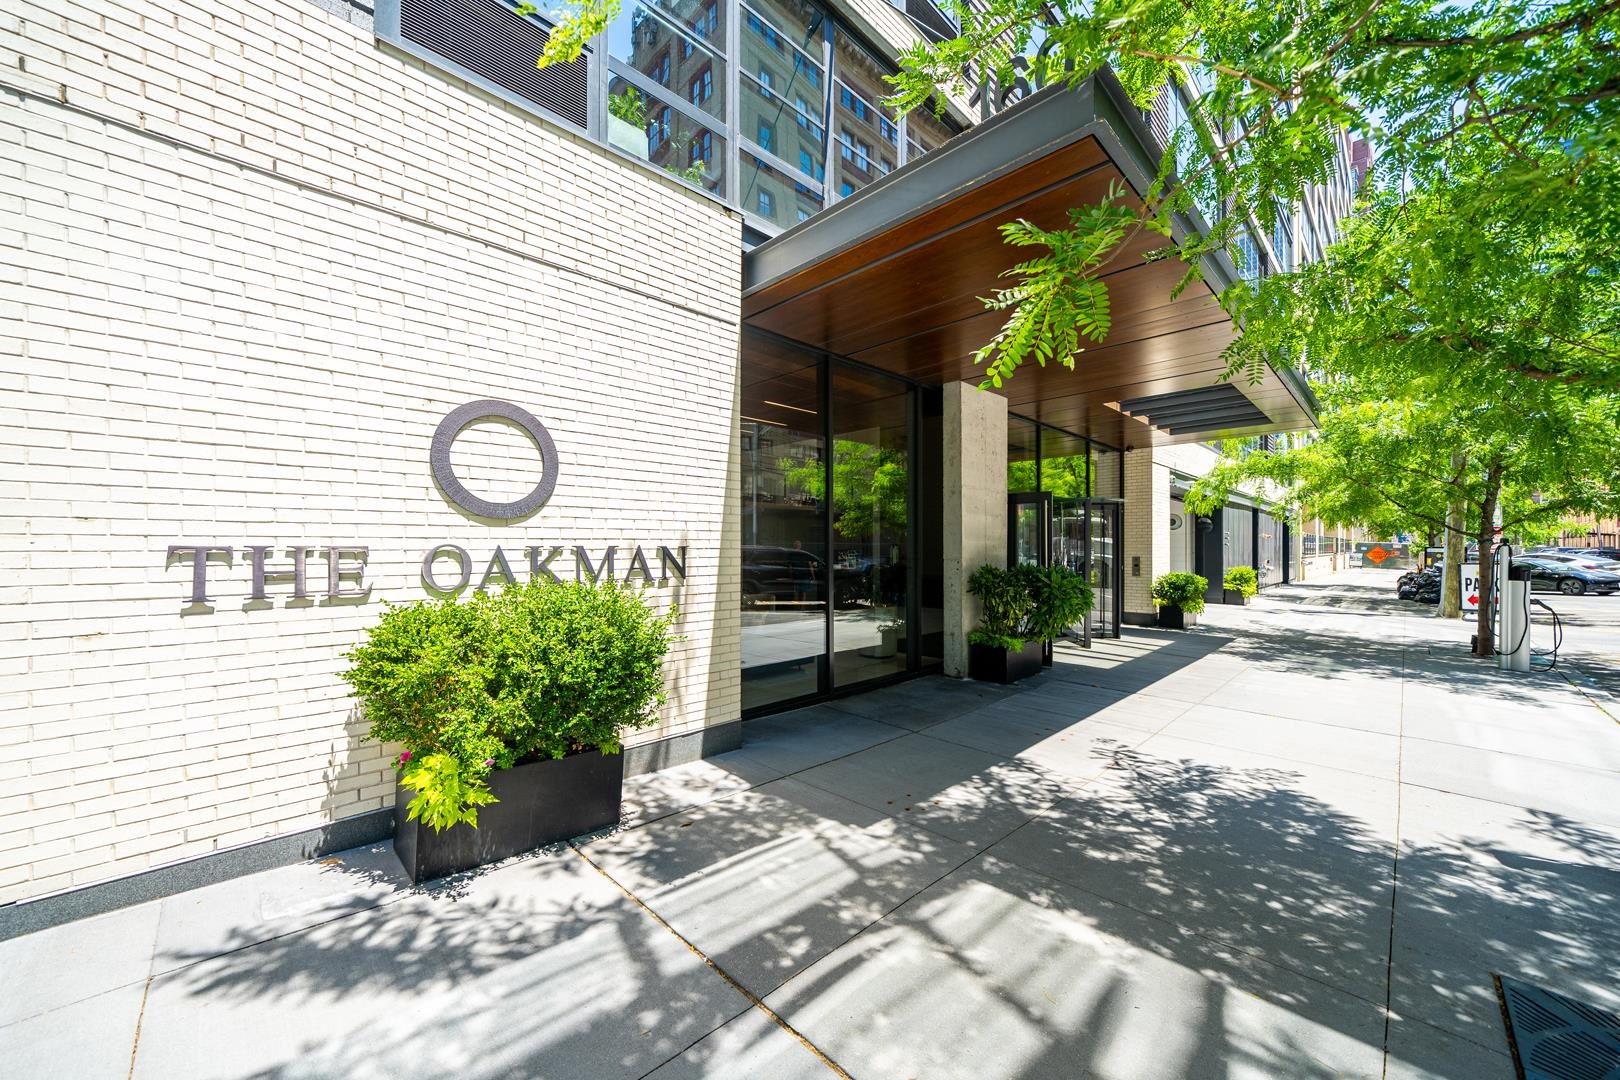 1 bedroom facing North with private outdoor space located in one of Jersey City's most sought after buildings, The Oakman. This unit features white oak hardwood floors throughout, in-unit Bosch washer/dryer. Chef's kitchen includes SS appliances, Fisher&Paykel fridge, Italian Pedini cabinets, quartz countertop peninsula. The Oakman is a full service luxury building with 24-hour doorman, fitness center, children's playroom, rooftop lounge, outdoor swimming pool, BBQ grills, DVORA in home services, dry cleaning! EV chargers and Valet Parking on-site by 3rd party. Excellent location just 3 blocks from the Grove St PATH and surrounded by great dining, shopping & farmers market. 20 year Tax Abatement with 13 years left. This is a Sponsor Unit